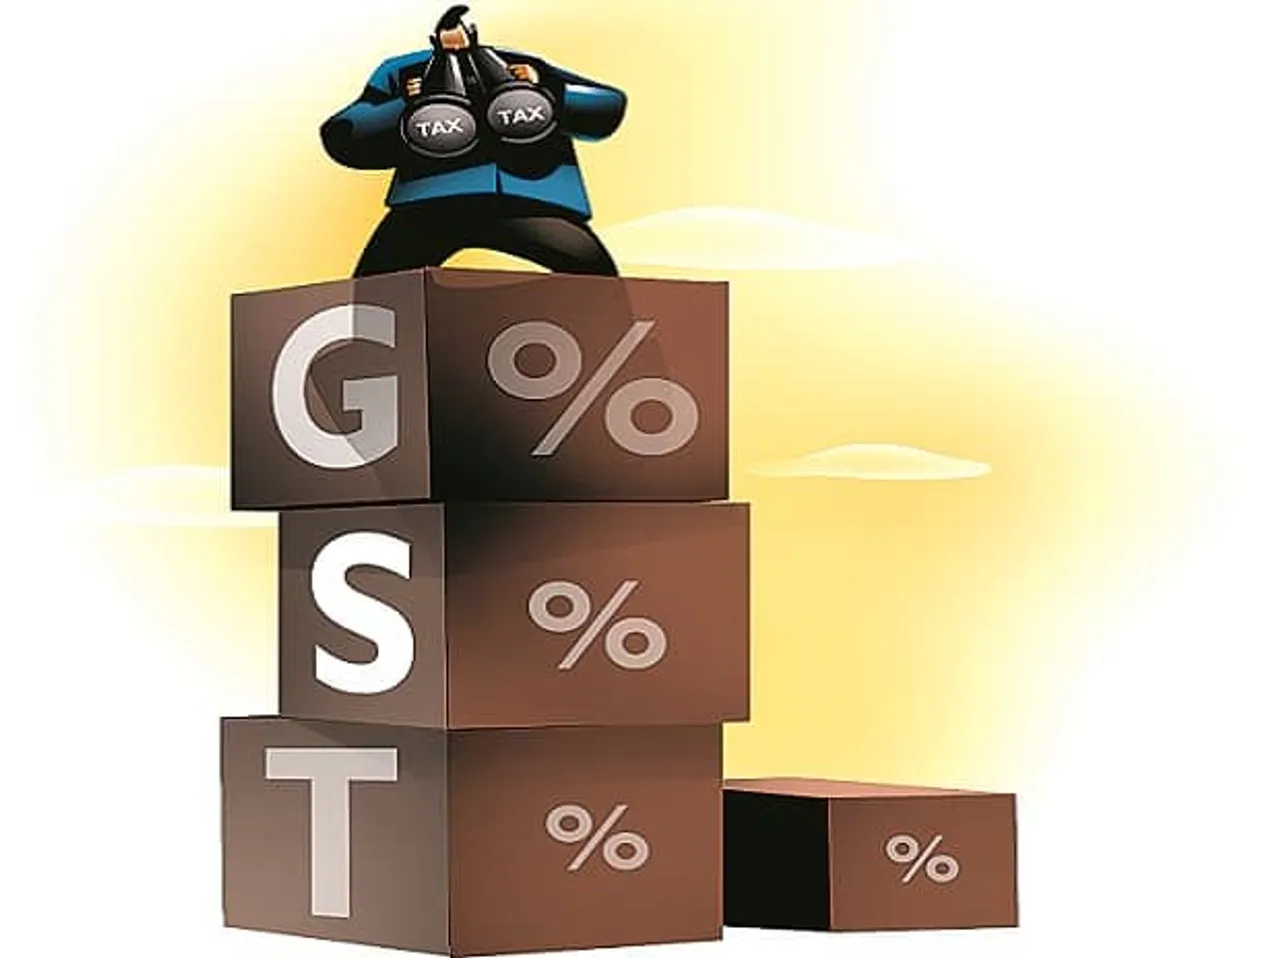 Ahmedabad Partners Worried About the GST Filing